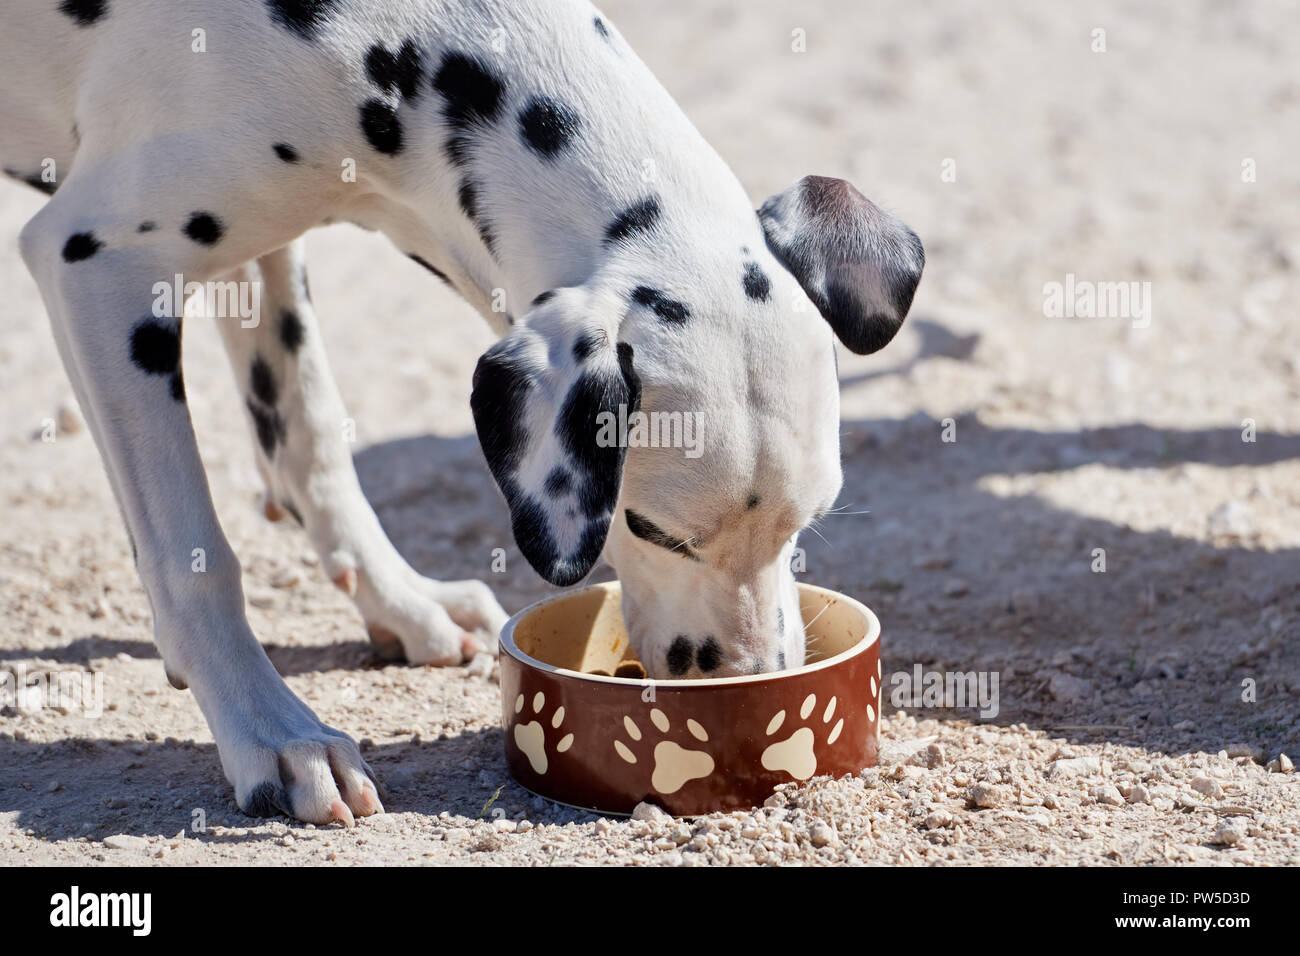 Dalmatian puppy eats dry food from a bowl Stock Photo